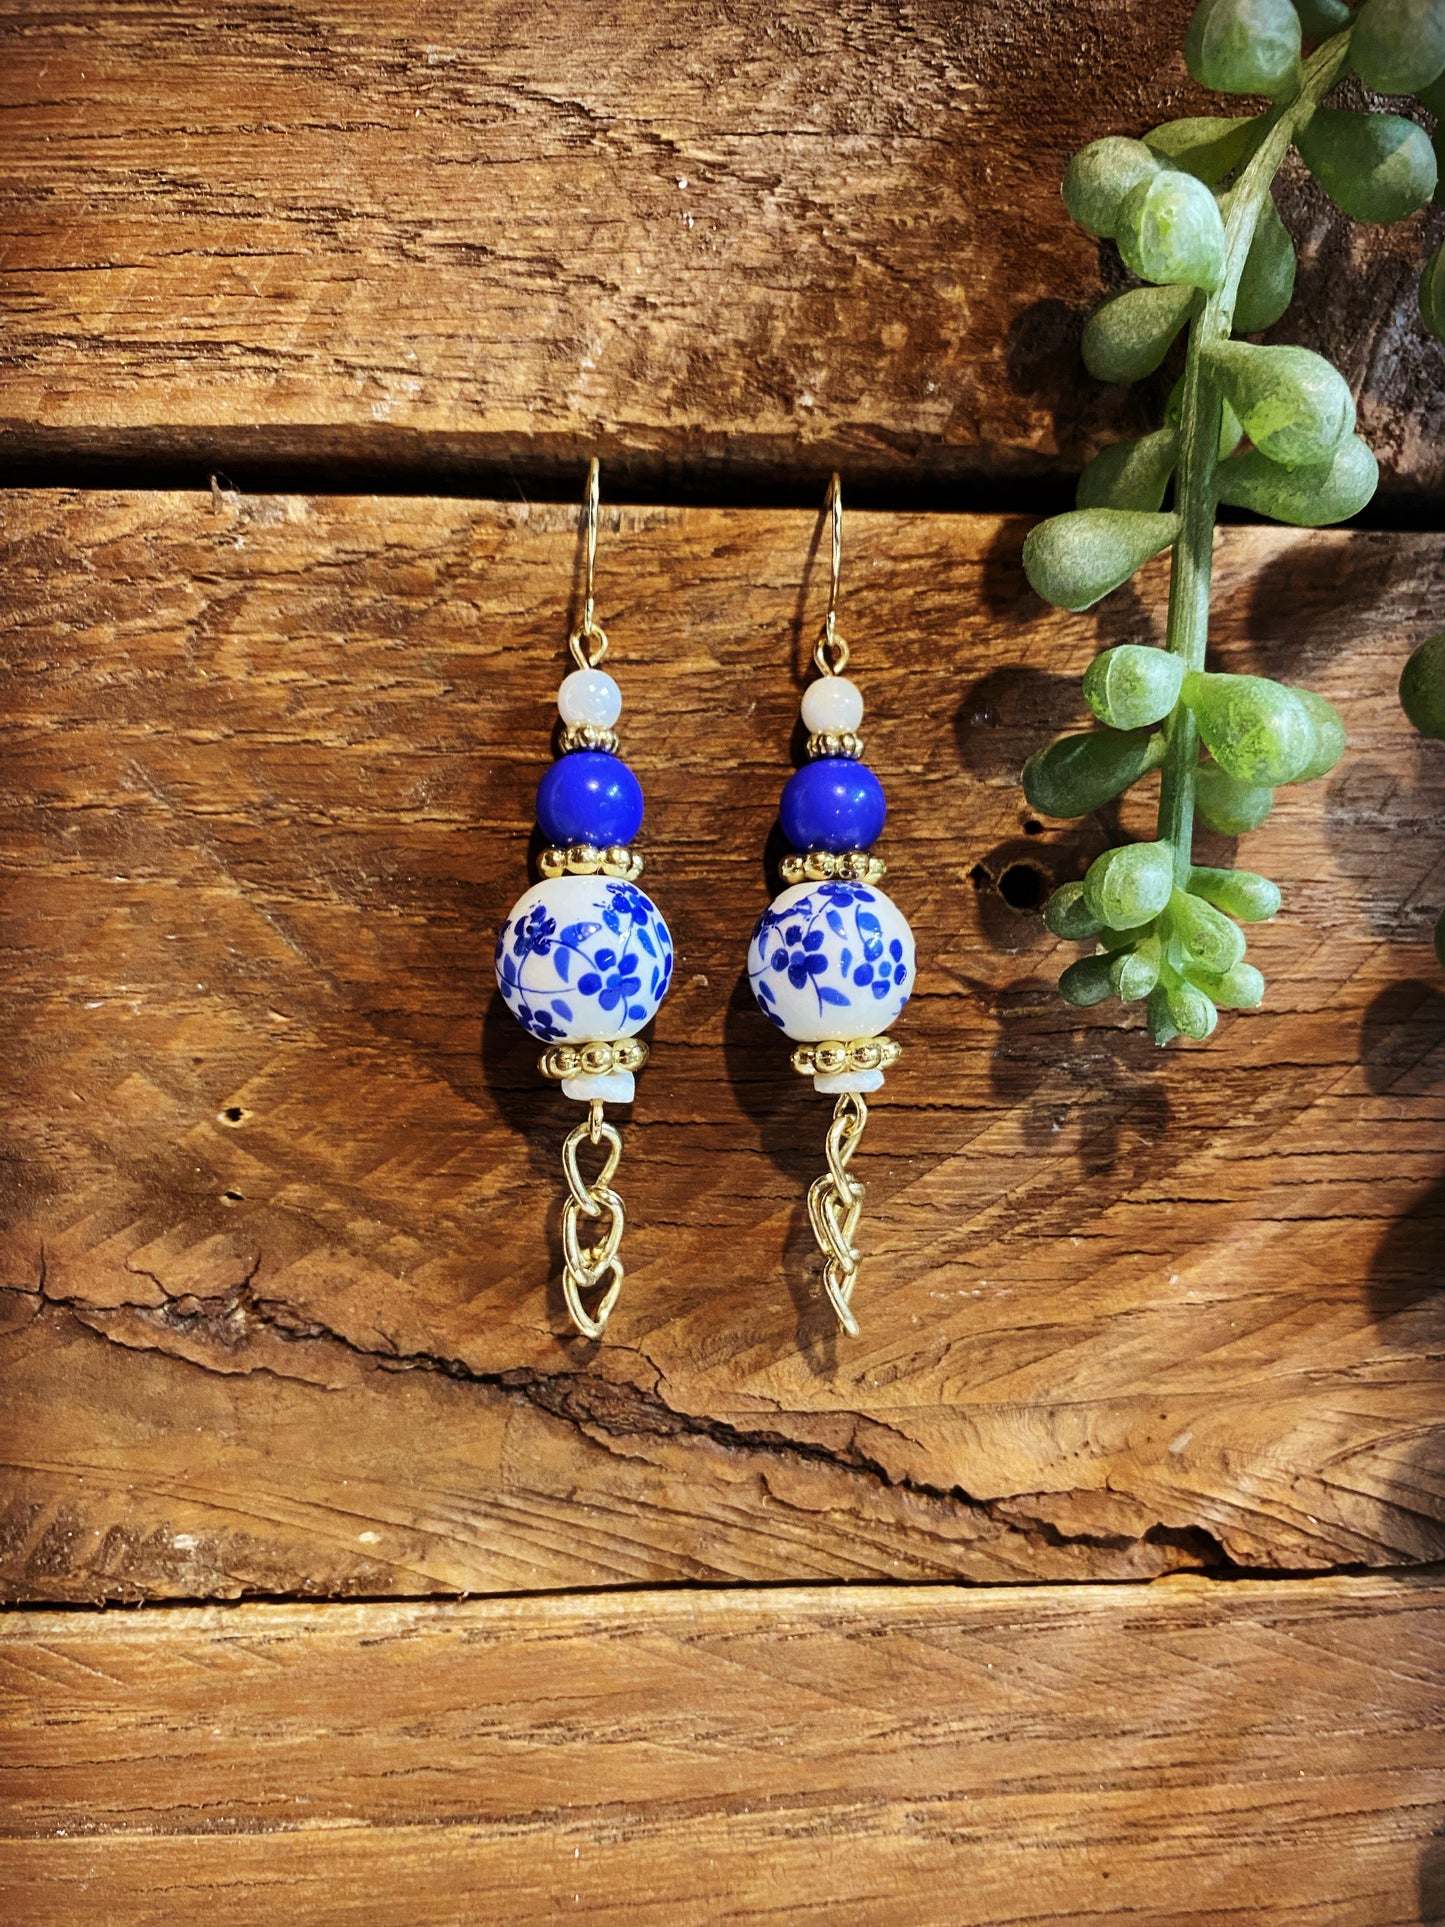 Blue Flowered China Dangles with Chain